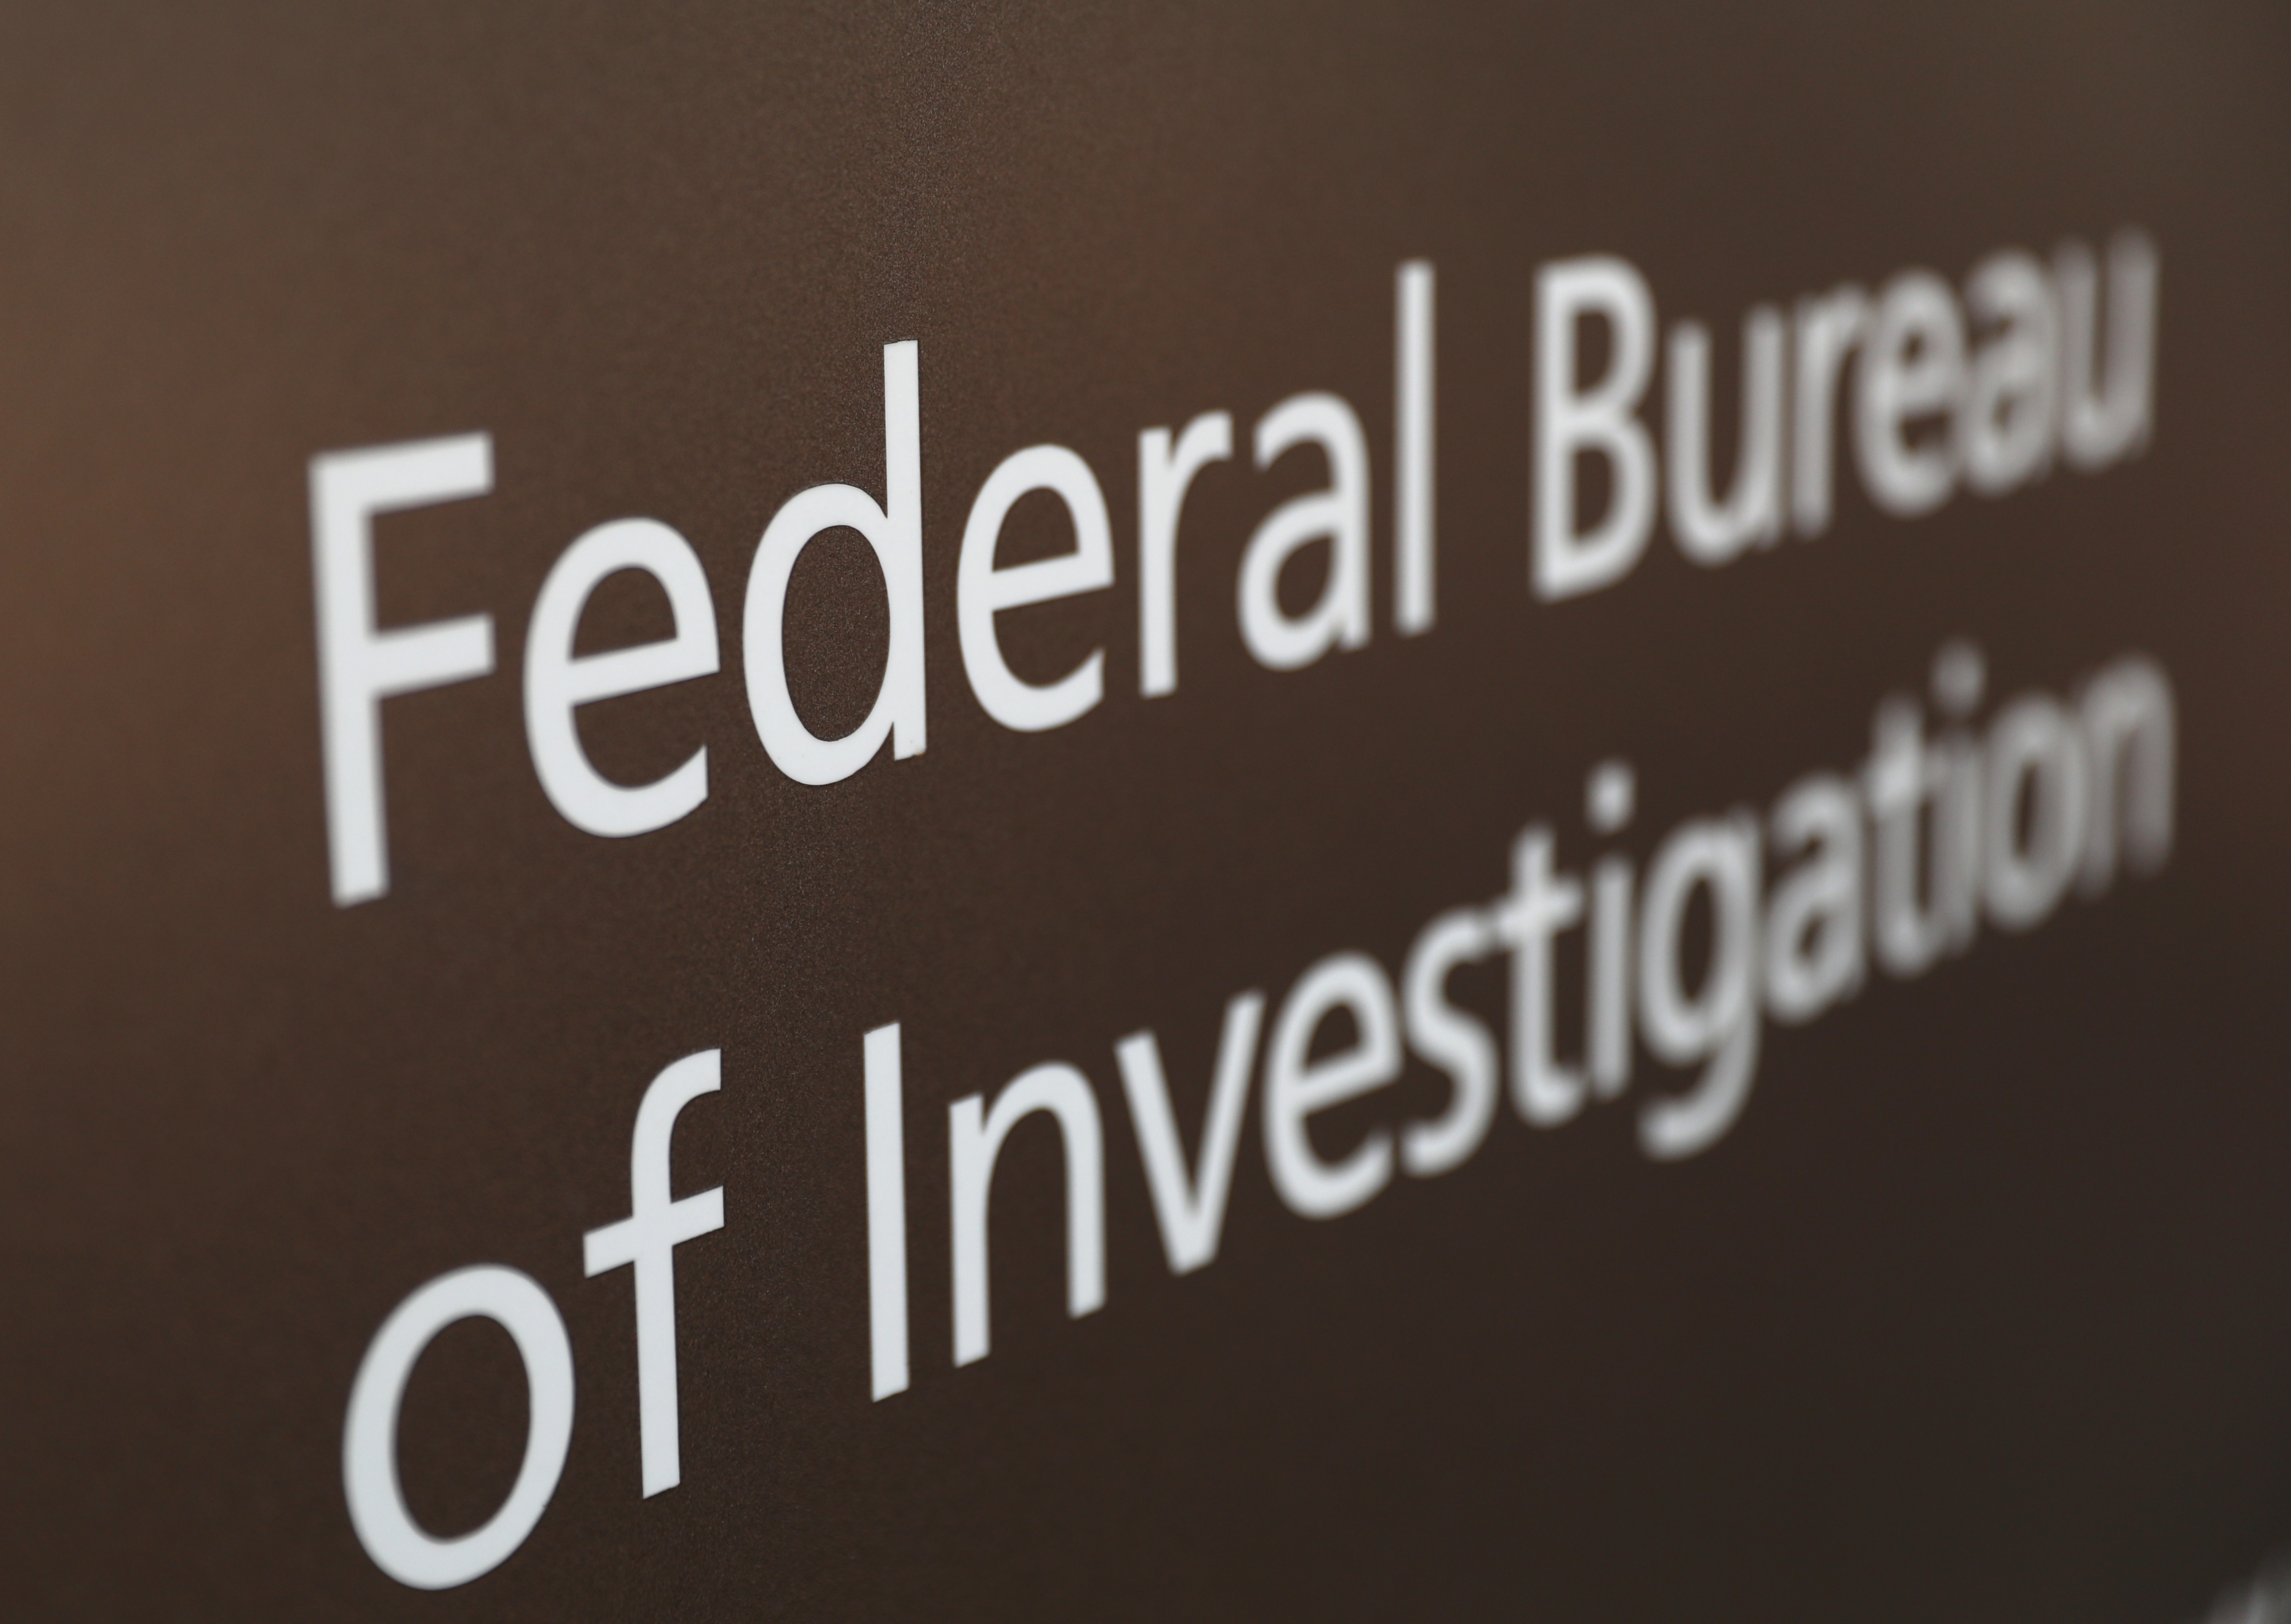 A sign of the Federal Bureau of Investigation is seen outside of the J. Edgar Hoover FBI Building in Washington, March 12, 2019. REUTERS/Leah Millis